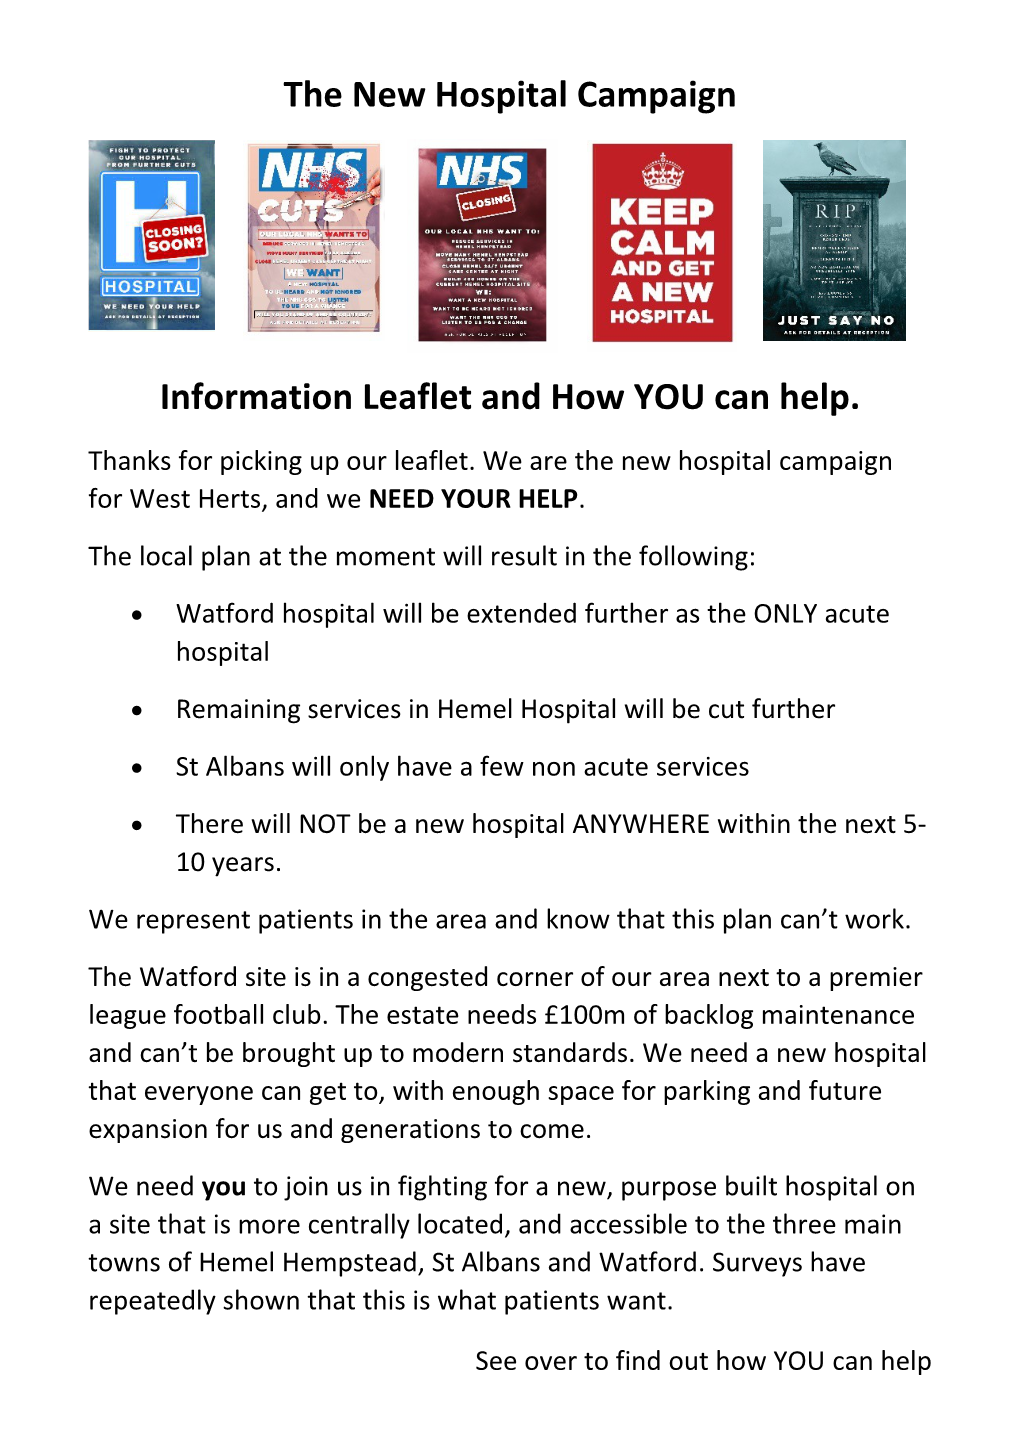 Information Leaflet and How YOU Can Help